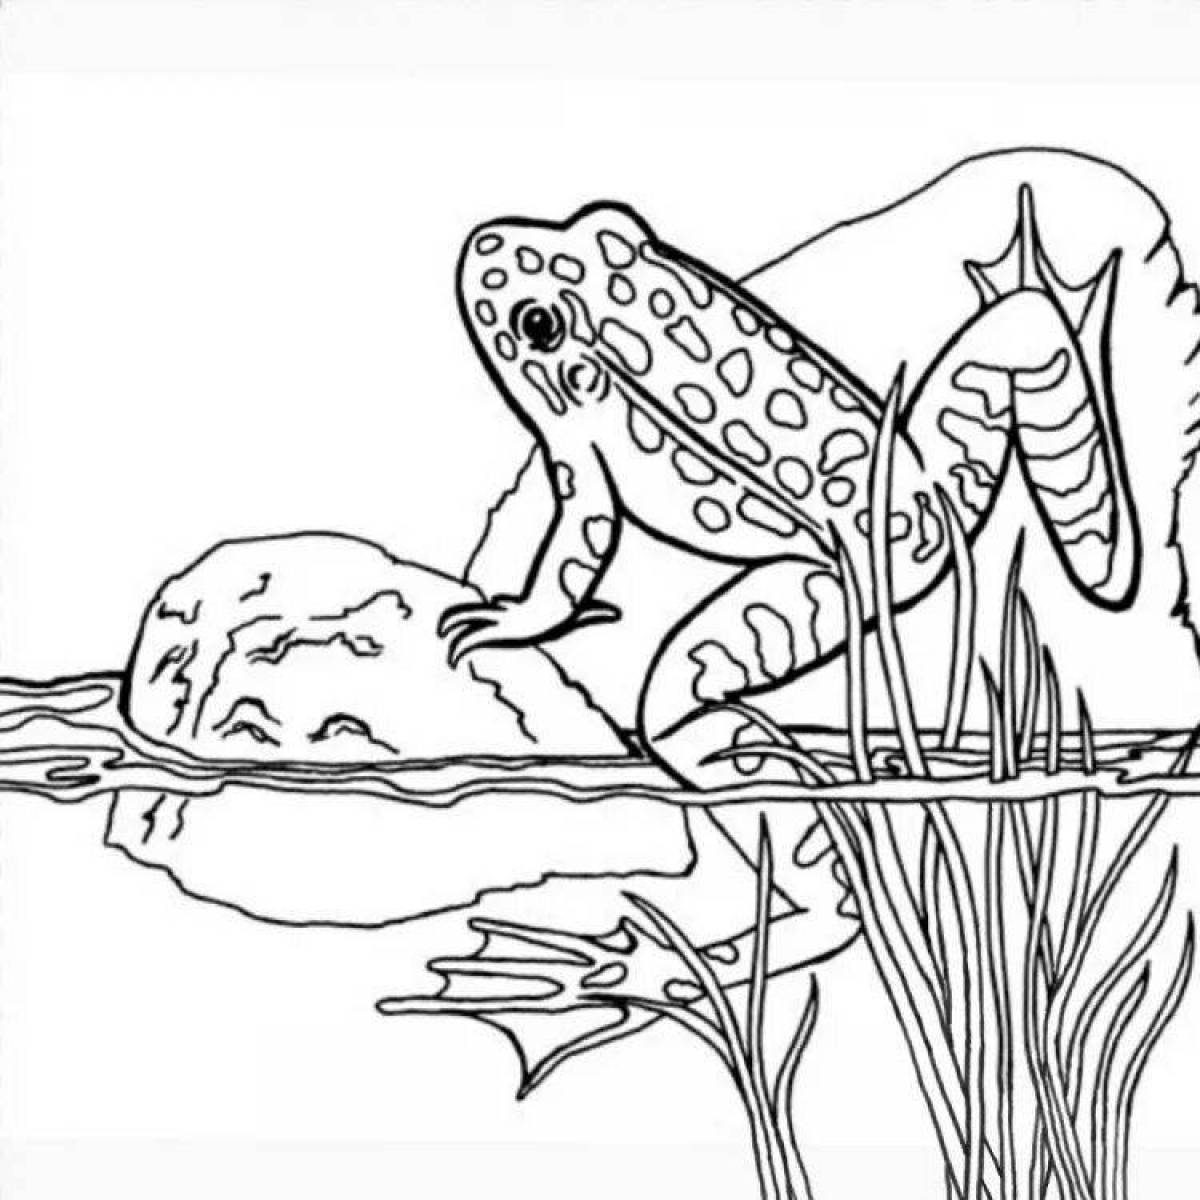 Amazing amphibian coloring pages